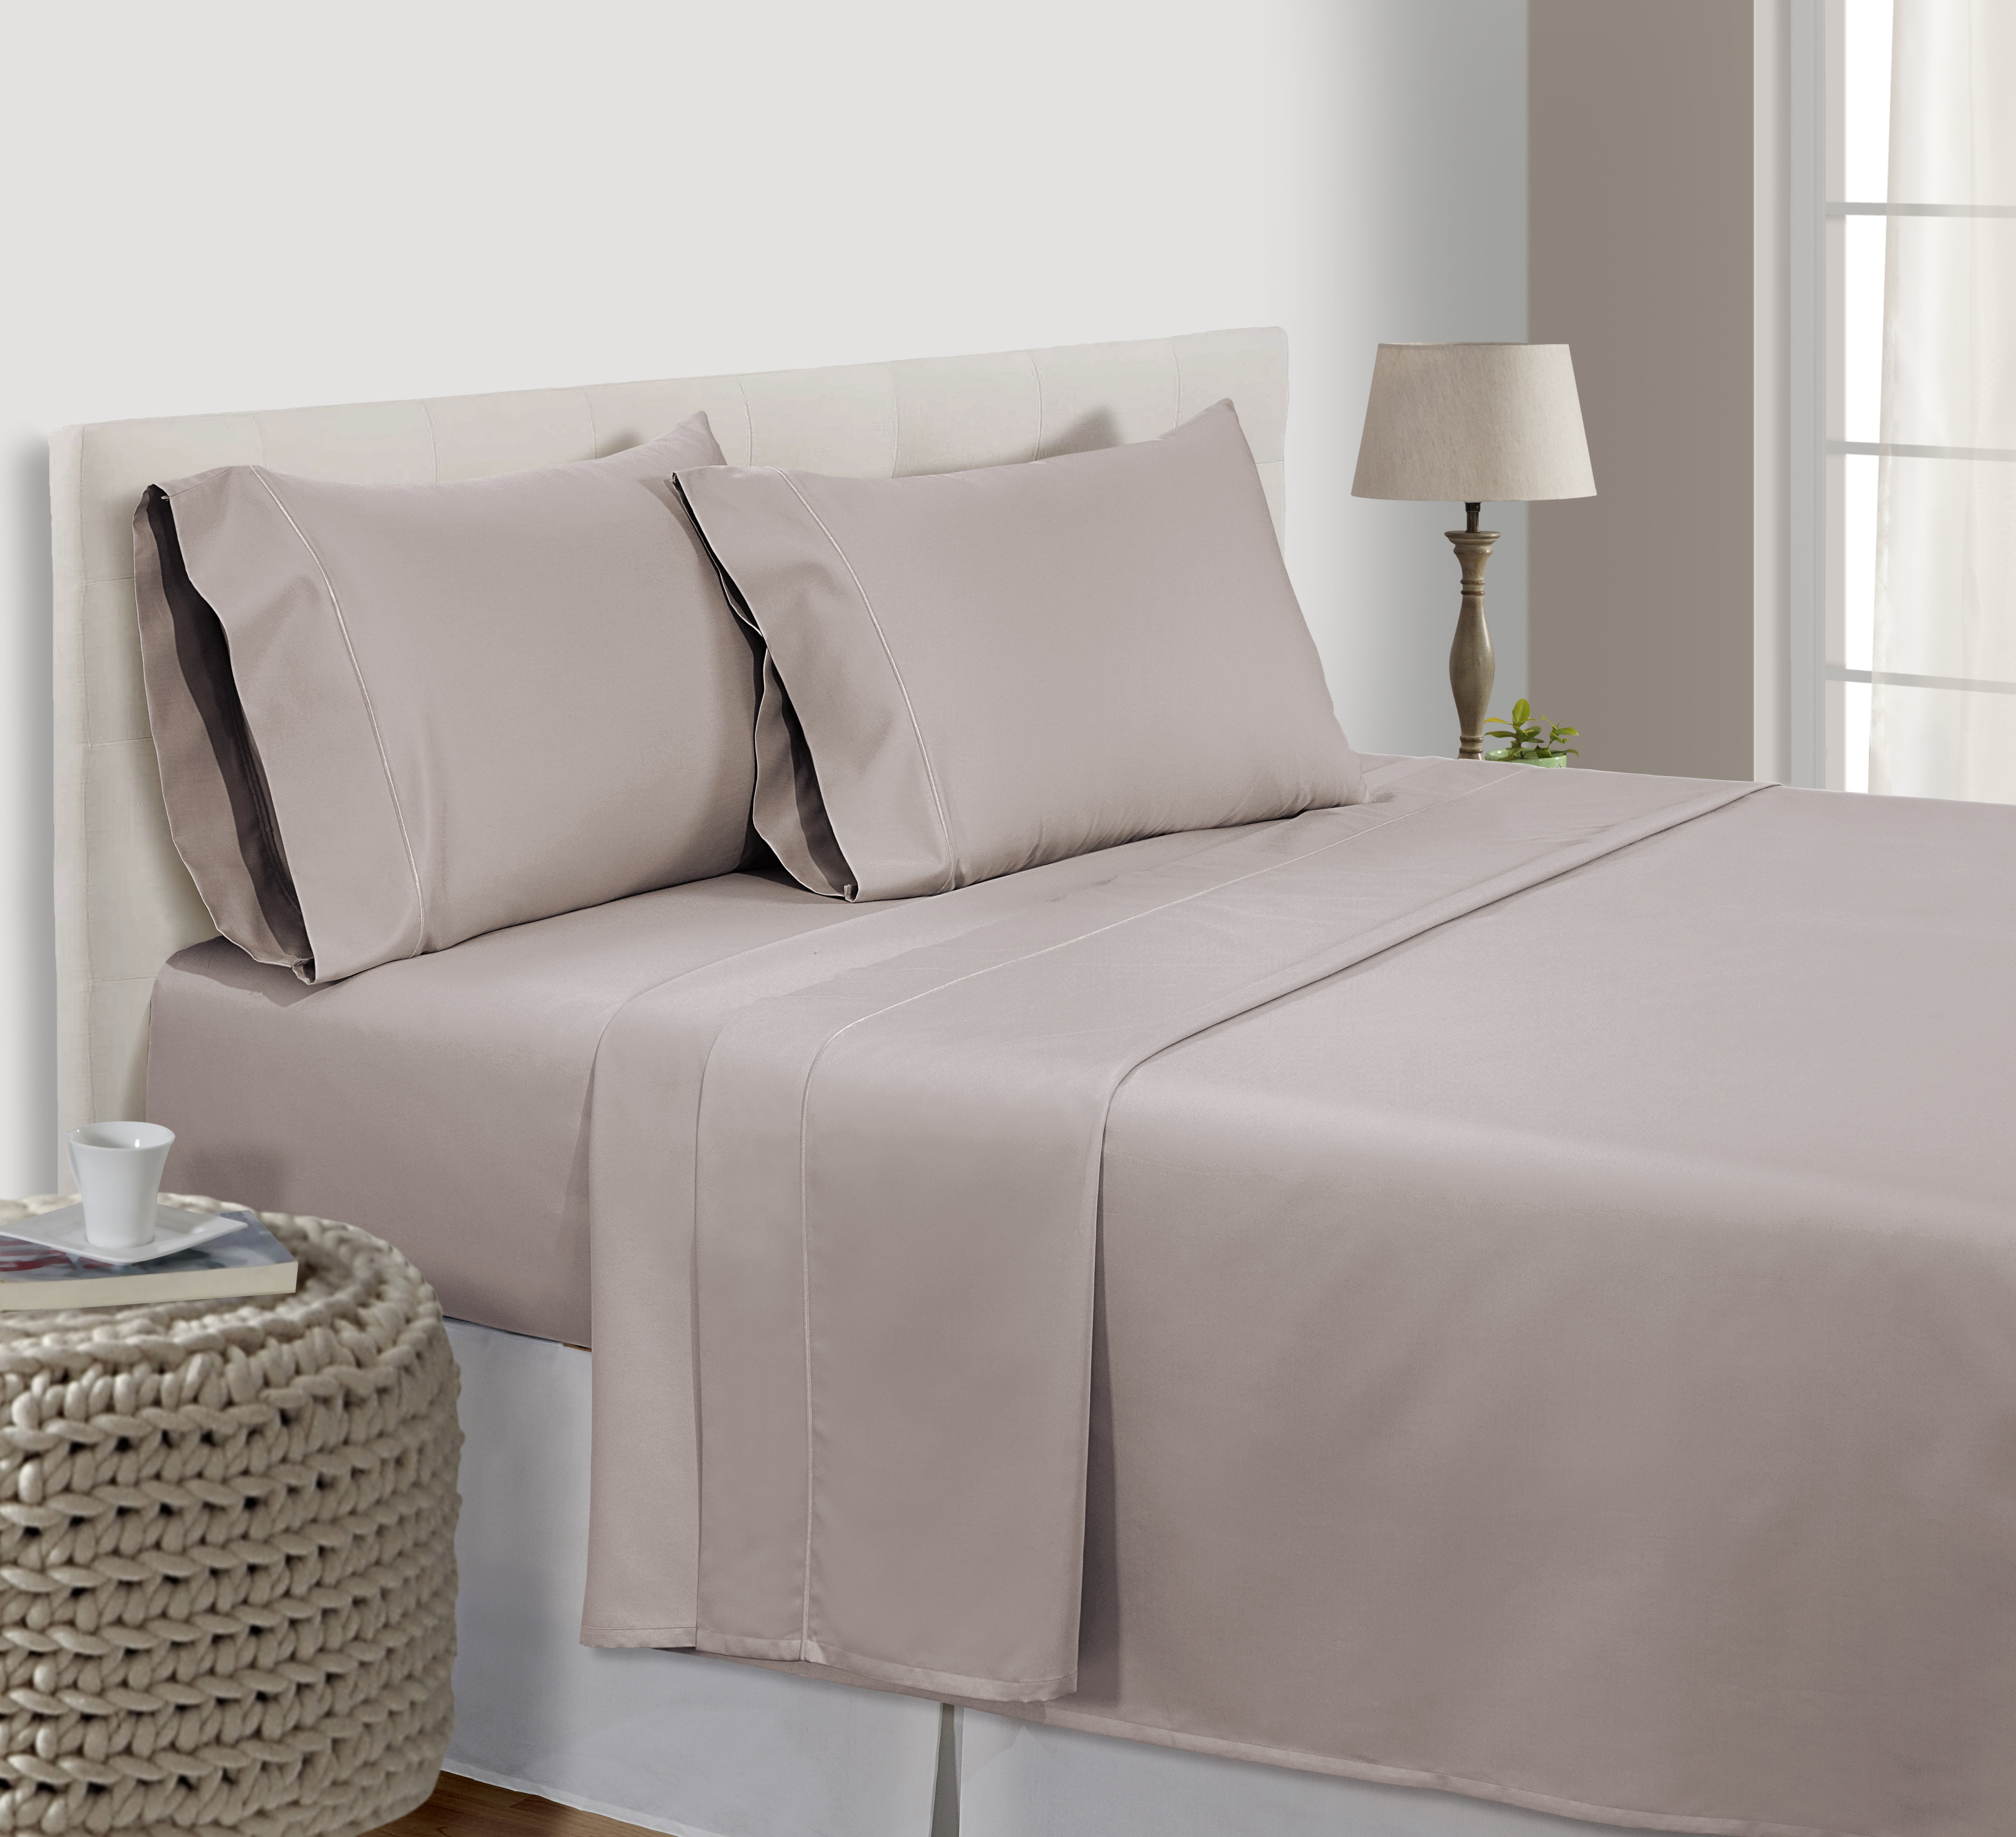 Hospitality Grade Ultra Comfort 800 Thread Count Egyptian Cotton 2 Piece Pillow Sham Set Standard Size Taupe Solid 